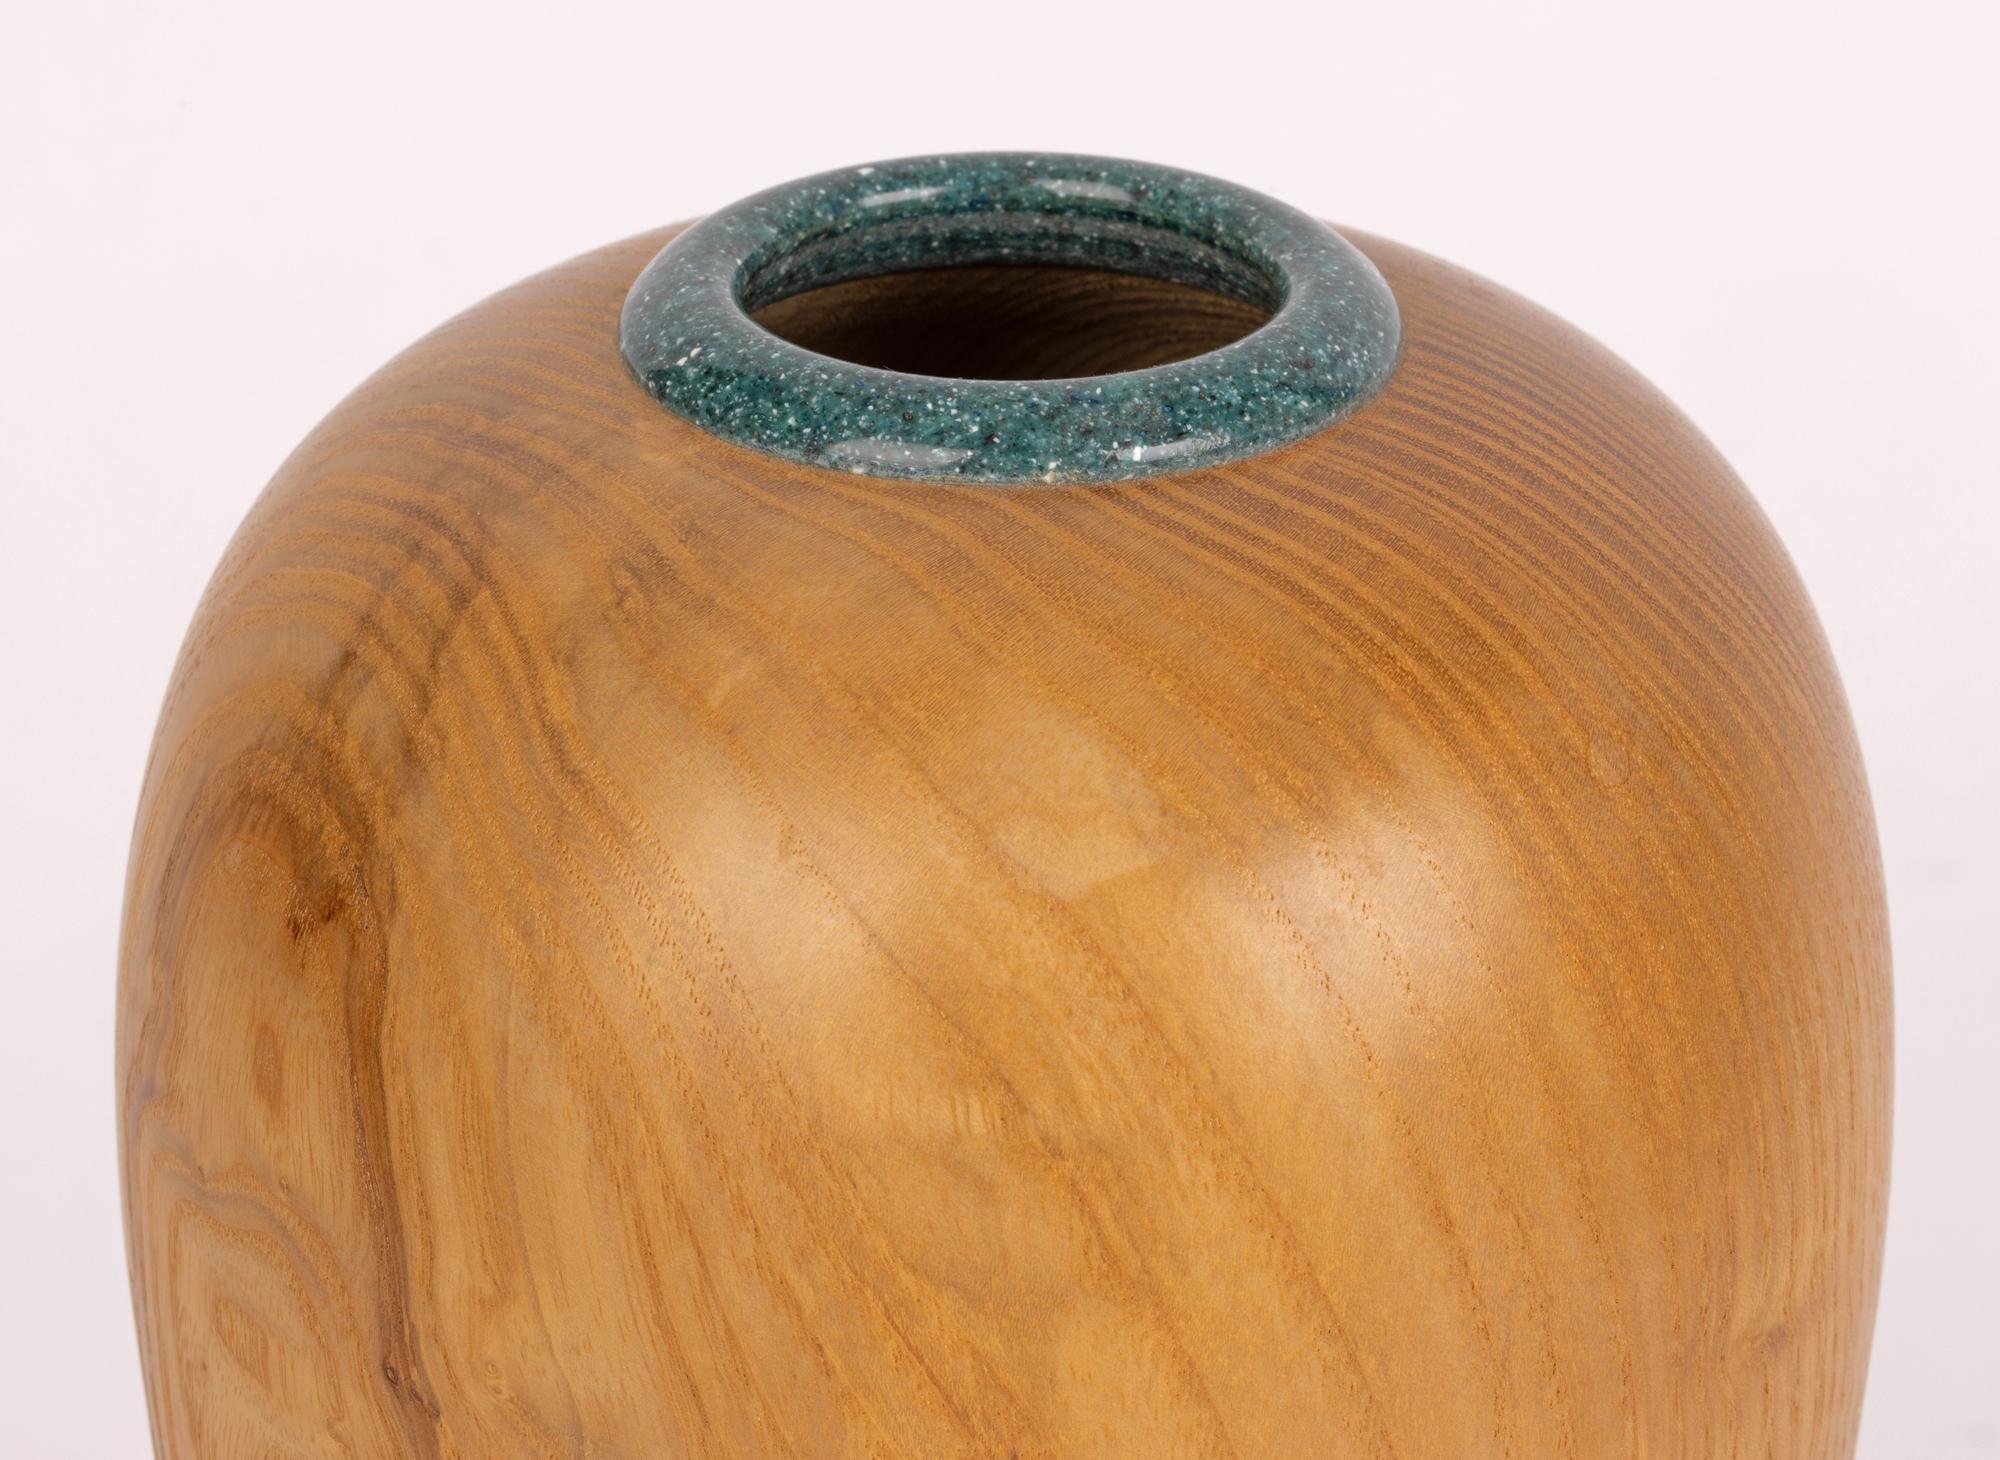 A finely hand-turned British hard wood ash vase with a green composite marble like rim dating by Andy James and dating from the 20th century. The vase of tall bulbous shape stands on a narrow flat round base and is turned from a single piece of wood